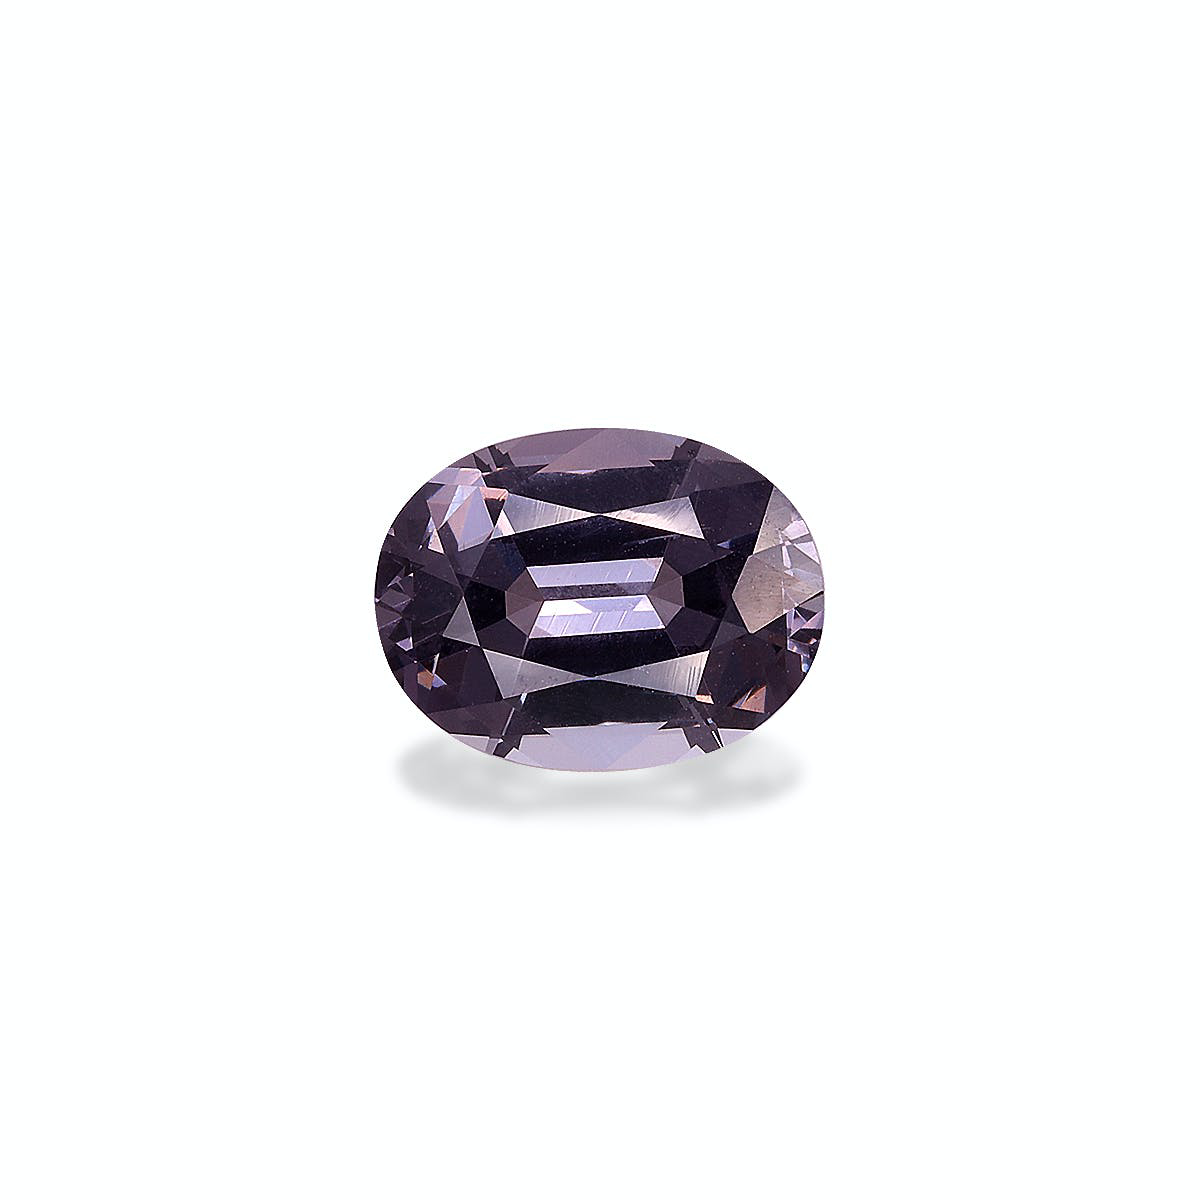 Picture of Metallic Grey Spinel 1.60ct - 8x6mm (SP0311)